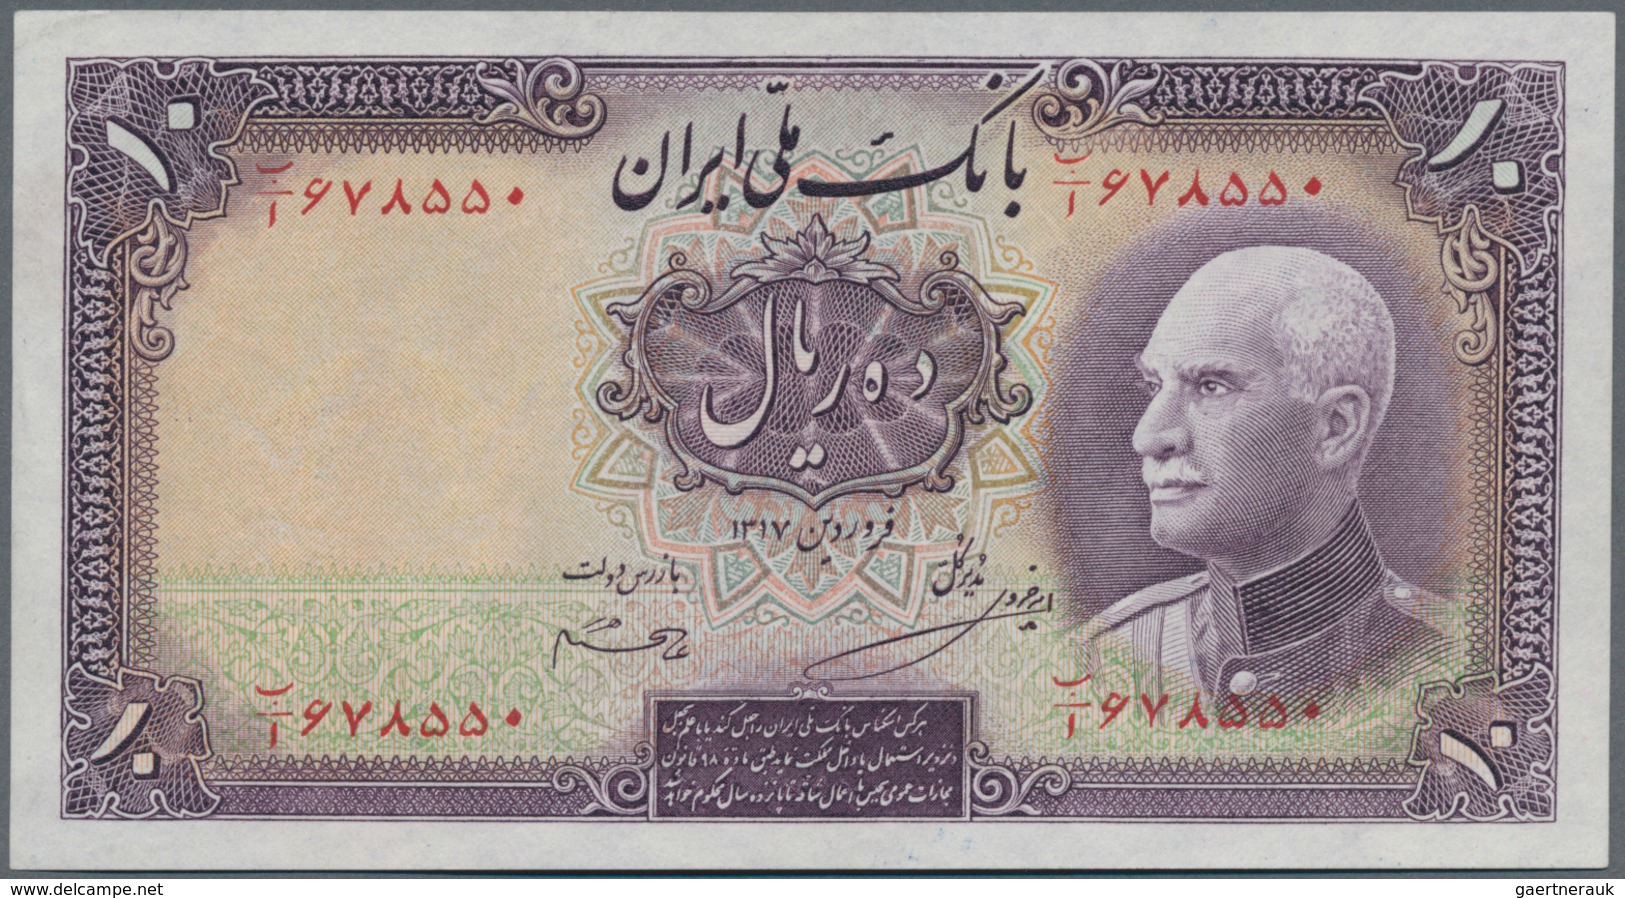 Iran: 10 Rials ND(1938) With Blue Stamp On Back, P. 33 In Condition: AUNC. - Iran